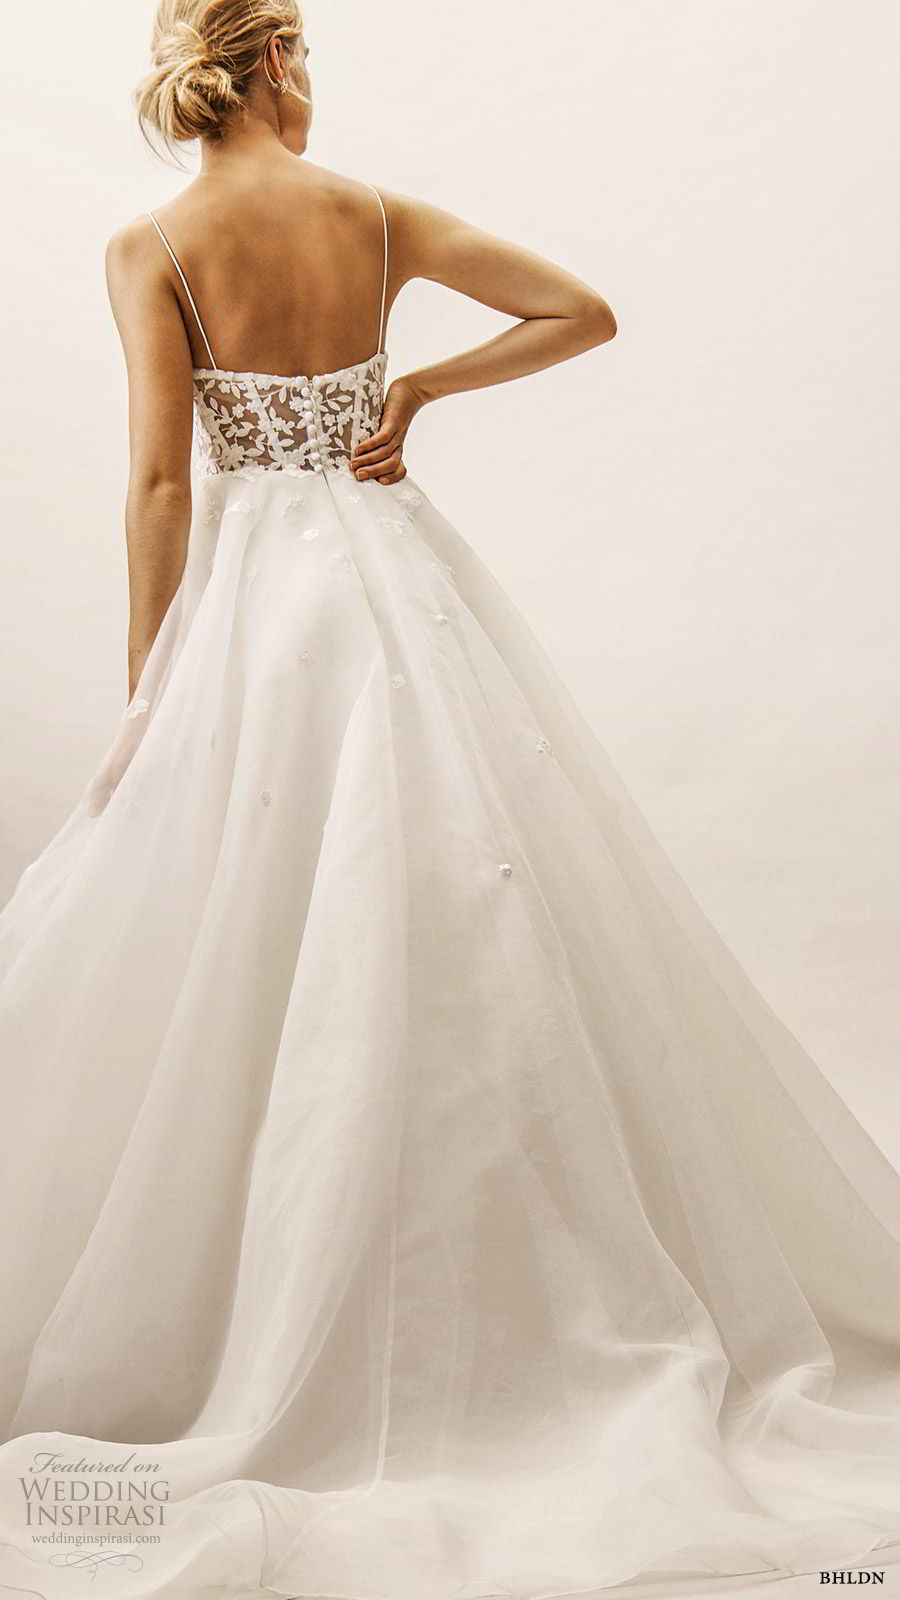 bhldn spring 2019 bridal sleeveless thin straps sweetheart neckline lace bodice a line ball gown wedding dress tiered skirt illusion back (6)